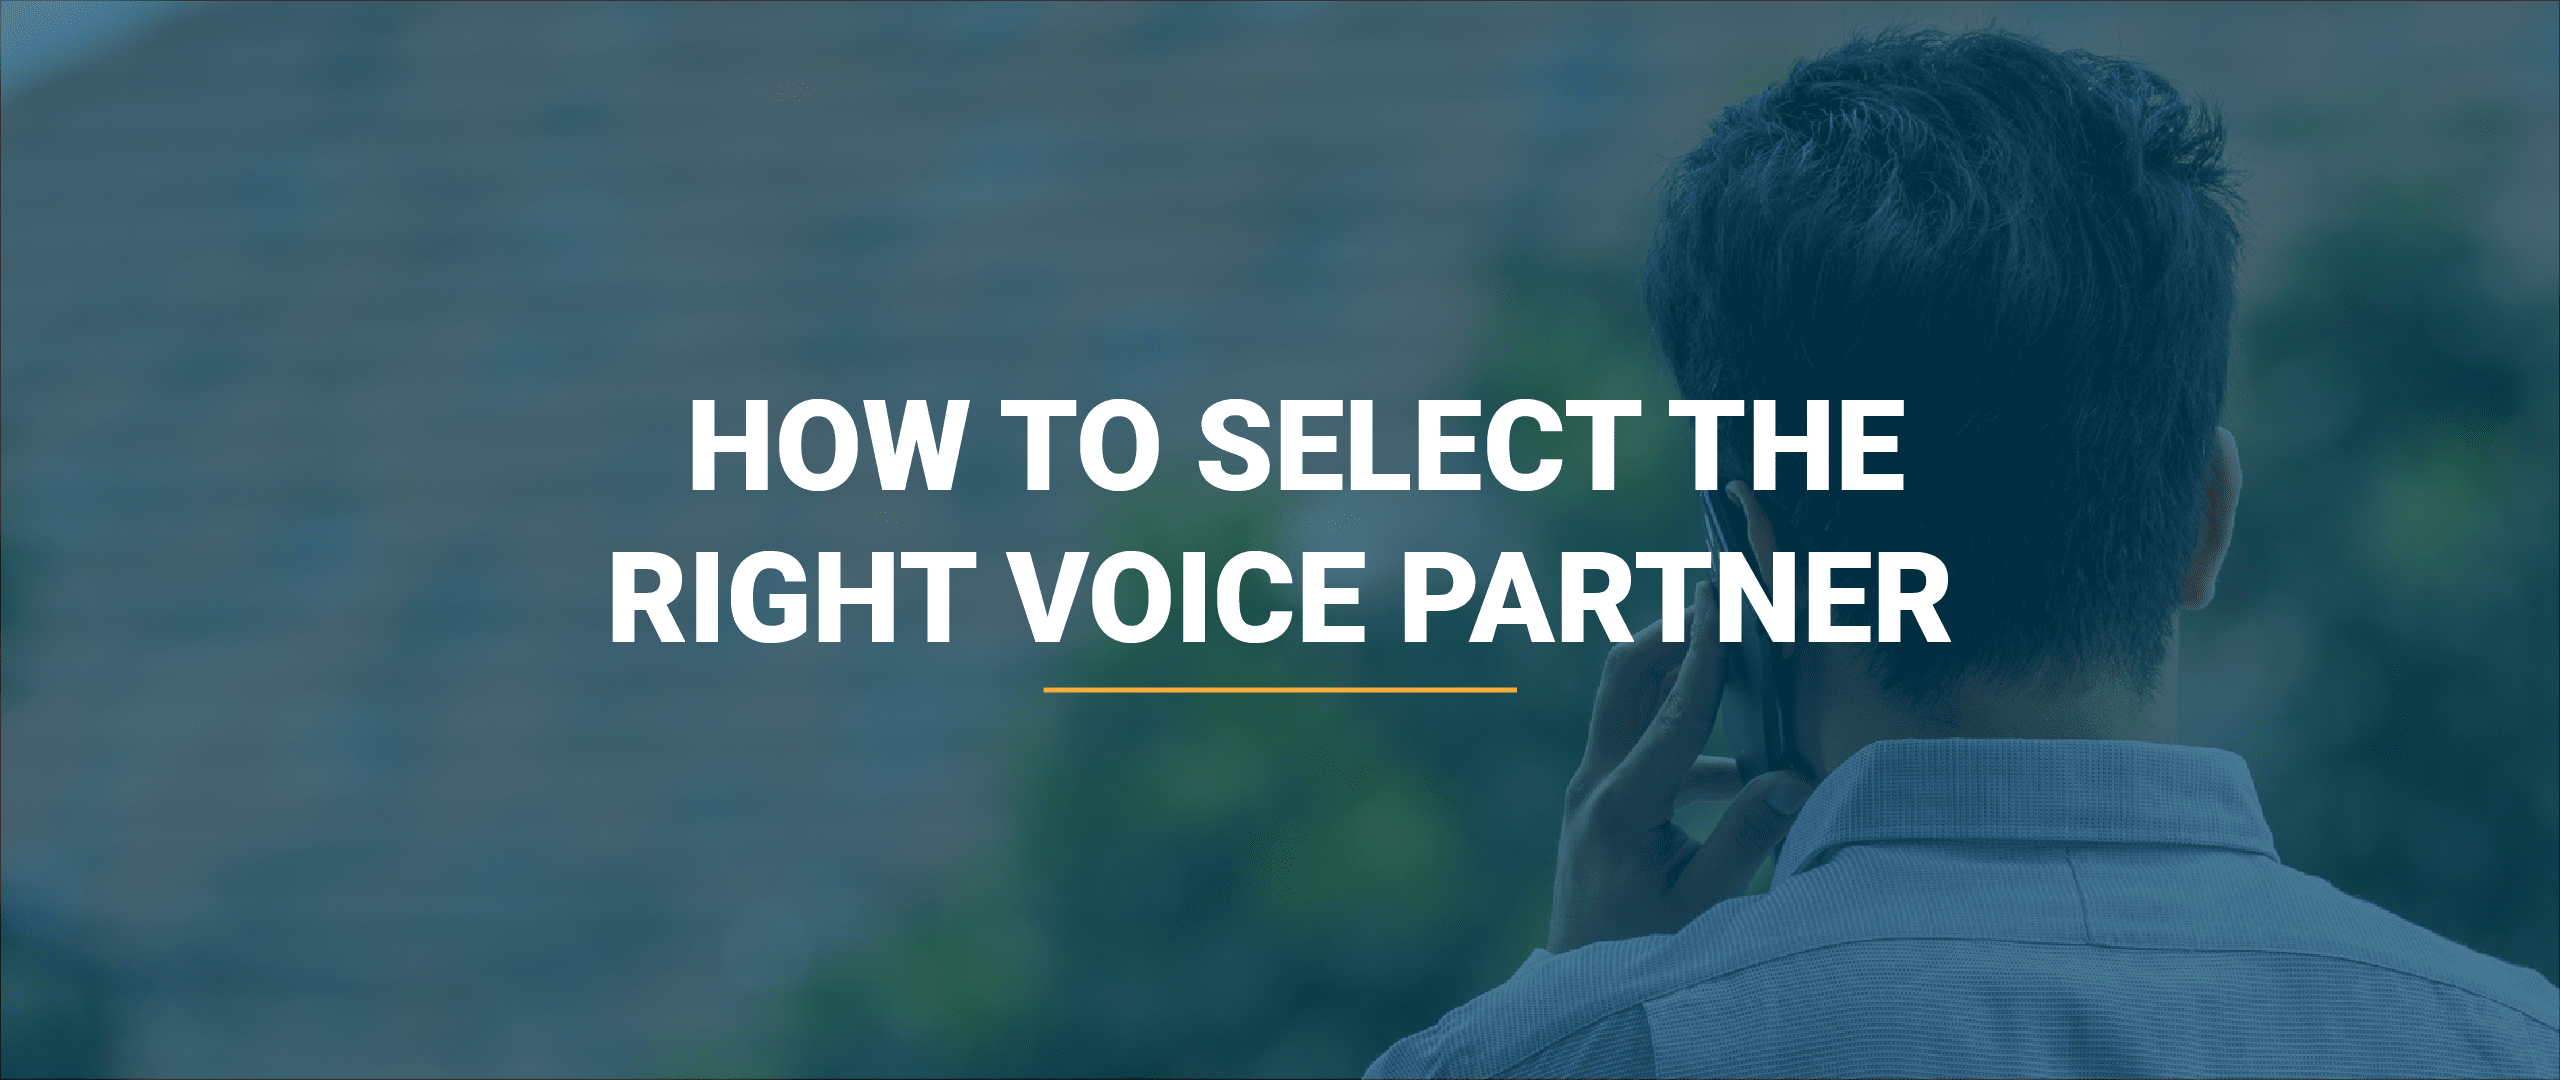 how to select the right voice partner